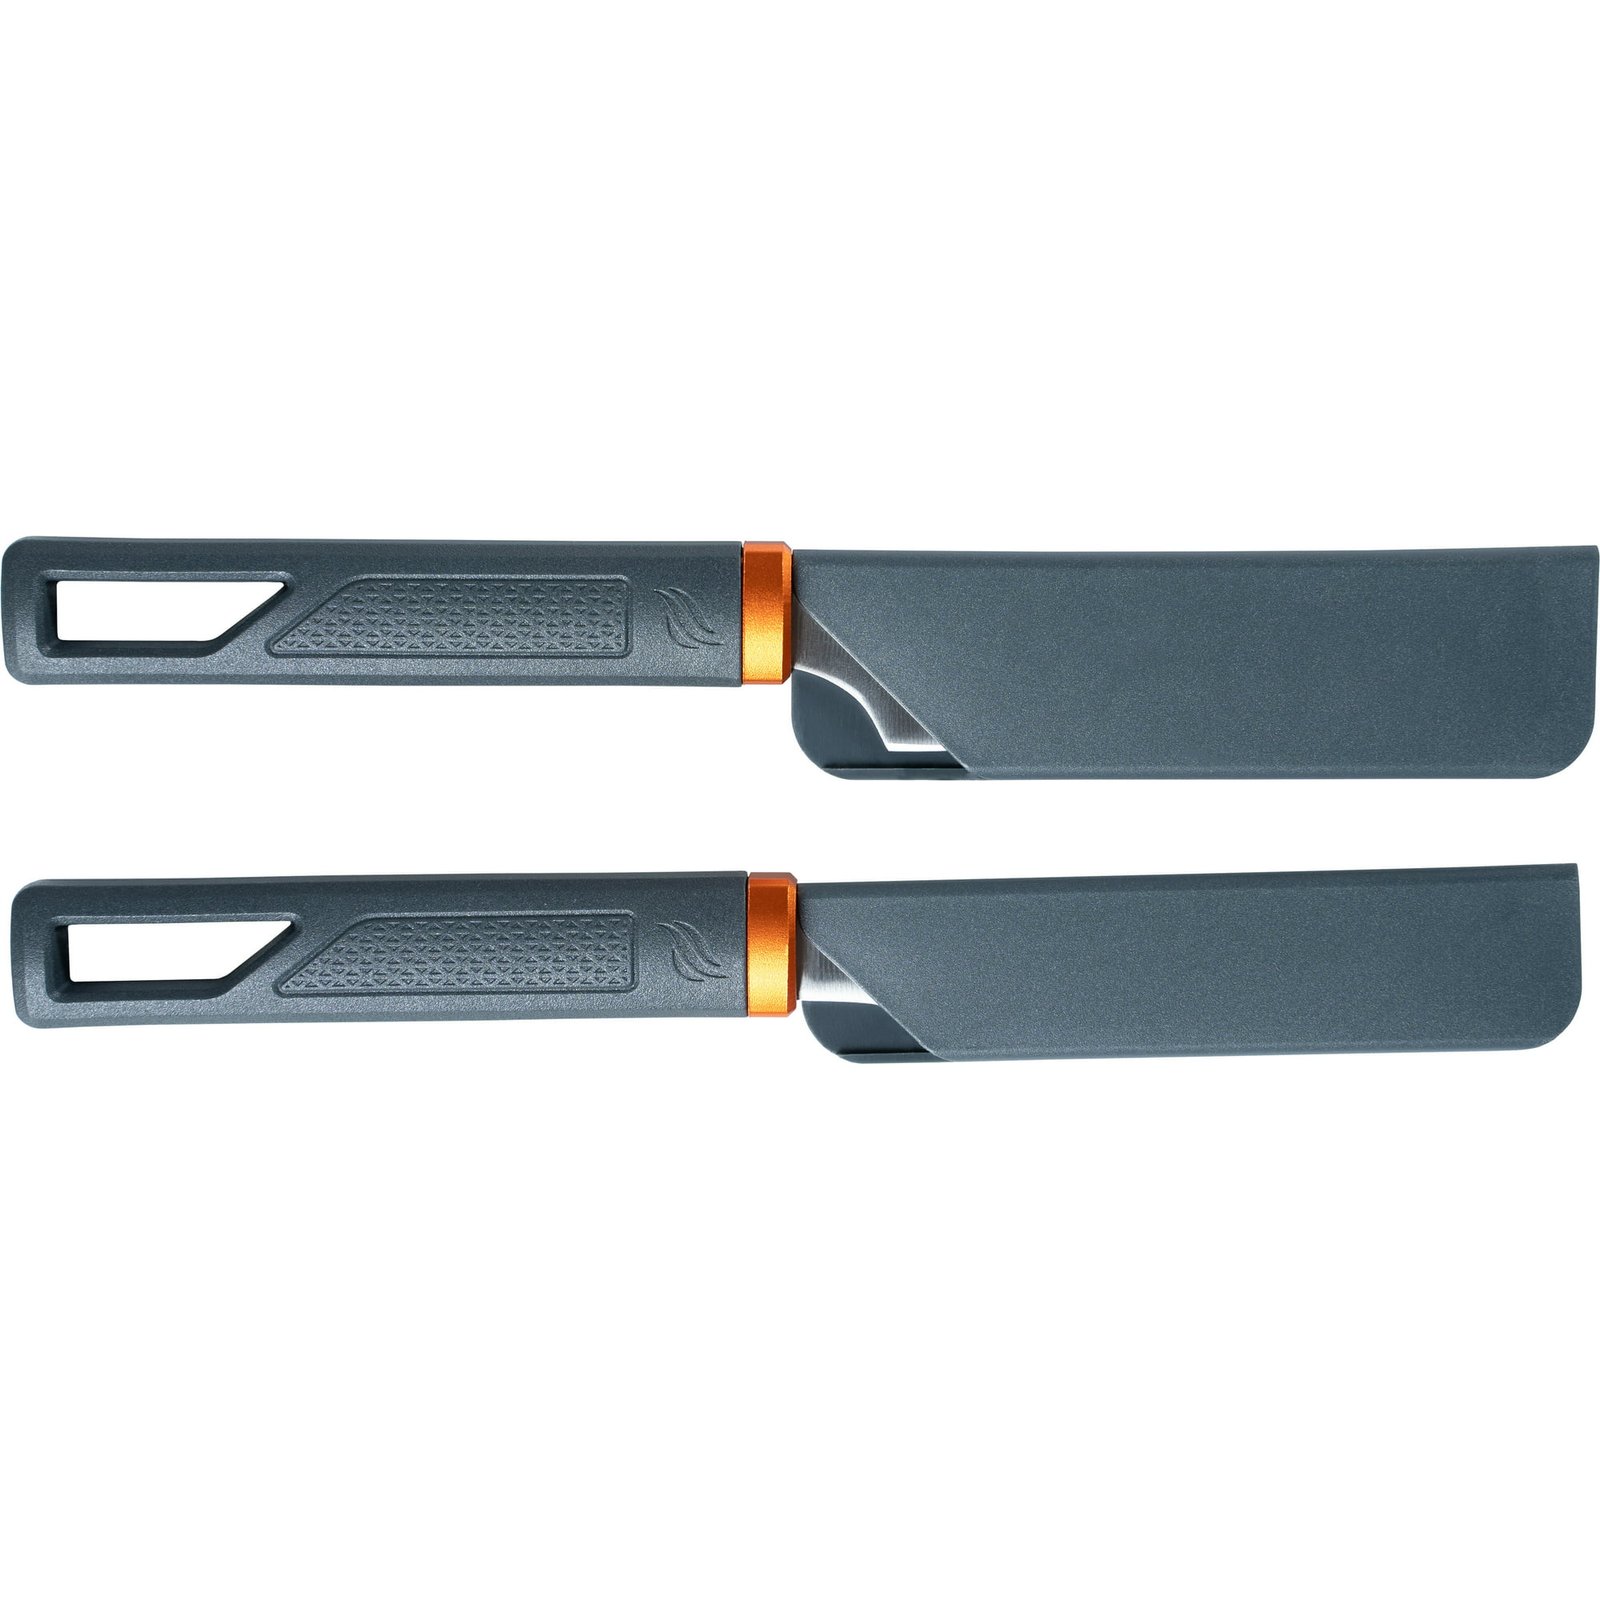 https://themarketdepot.com/wp-content/uploads/2023/01/Blackstone-Adventure-Ready-Stow-and-Go-Silicone-Knife-Set-Roll-5.jpeg